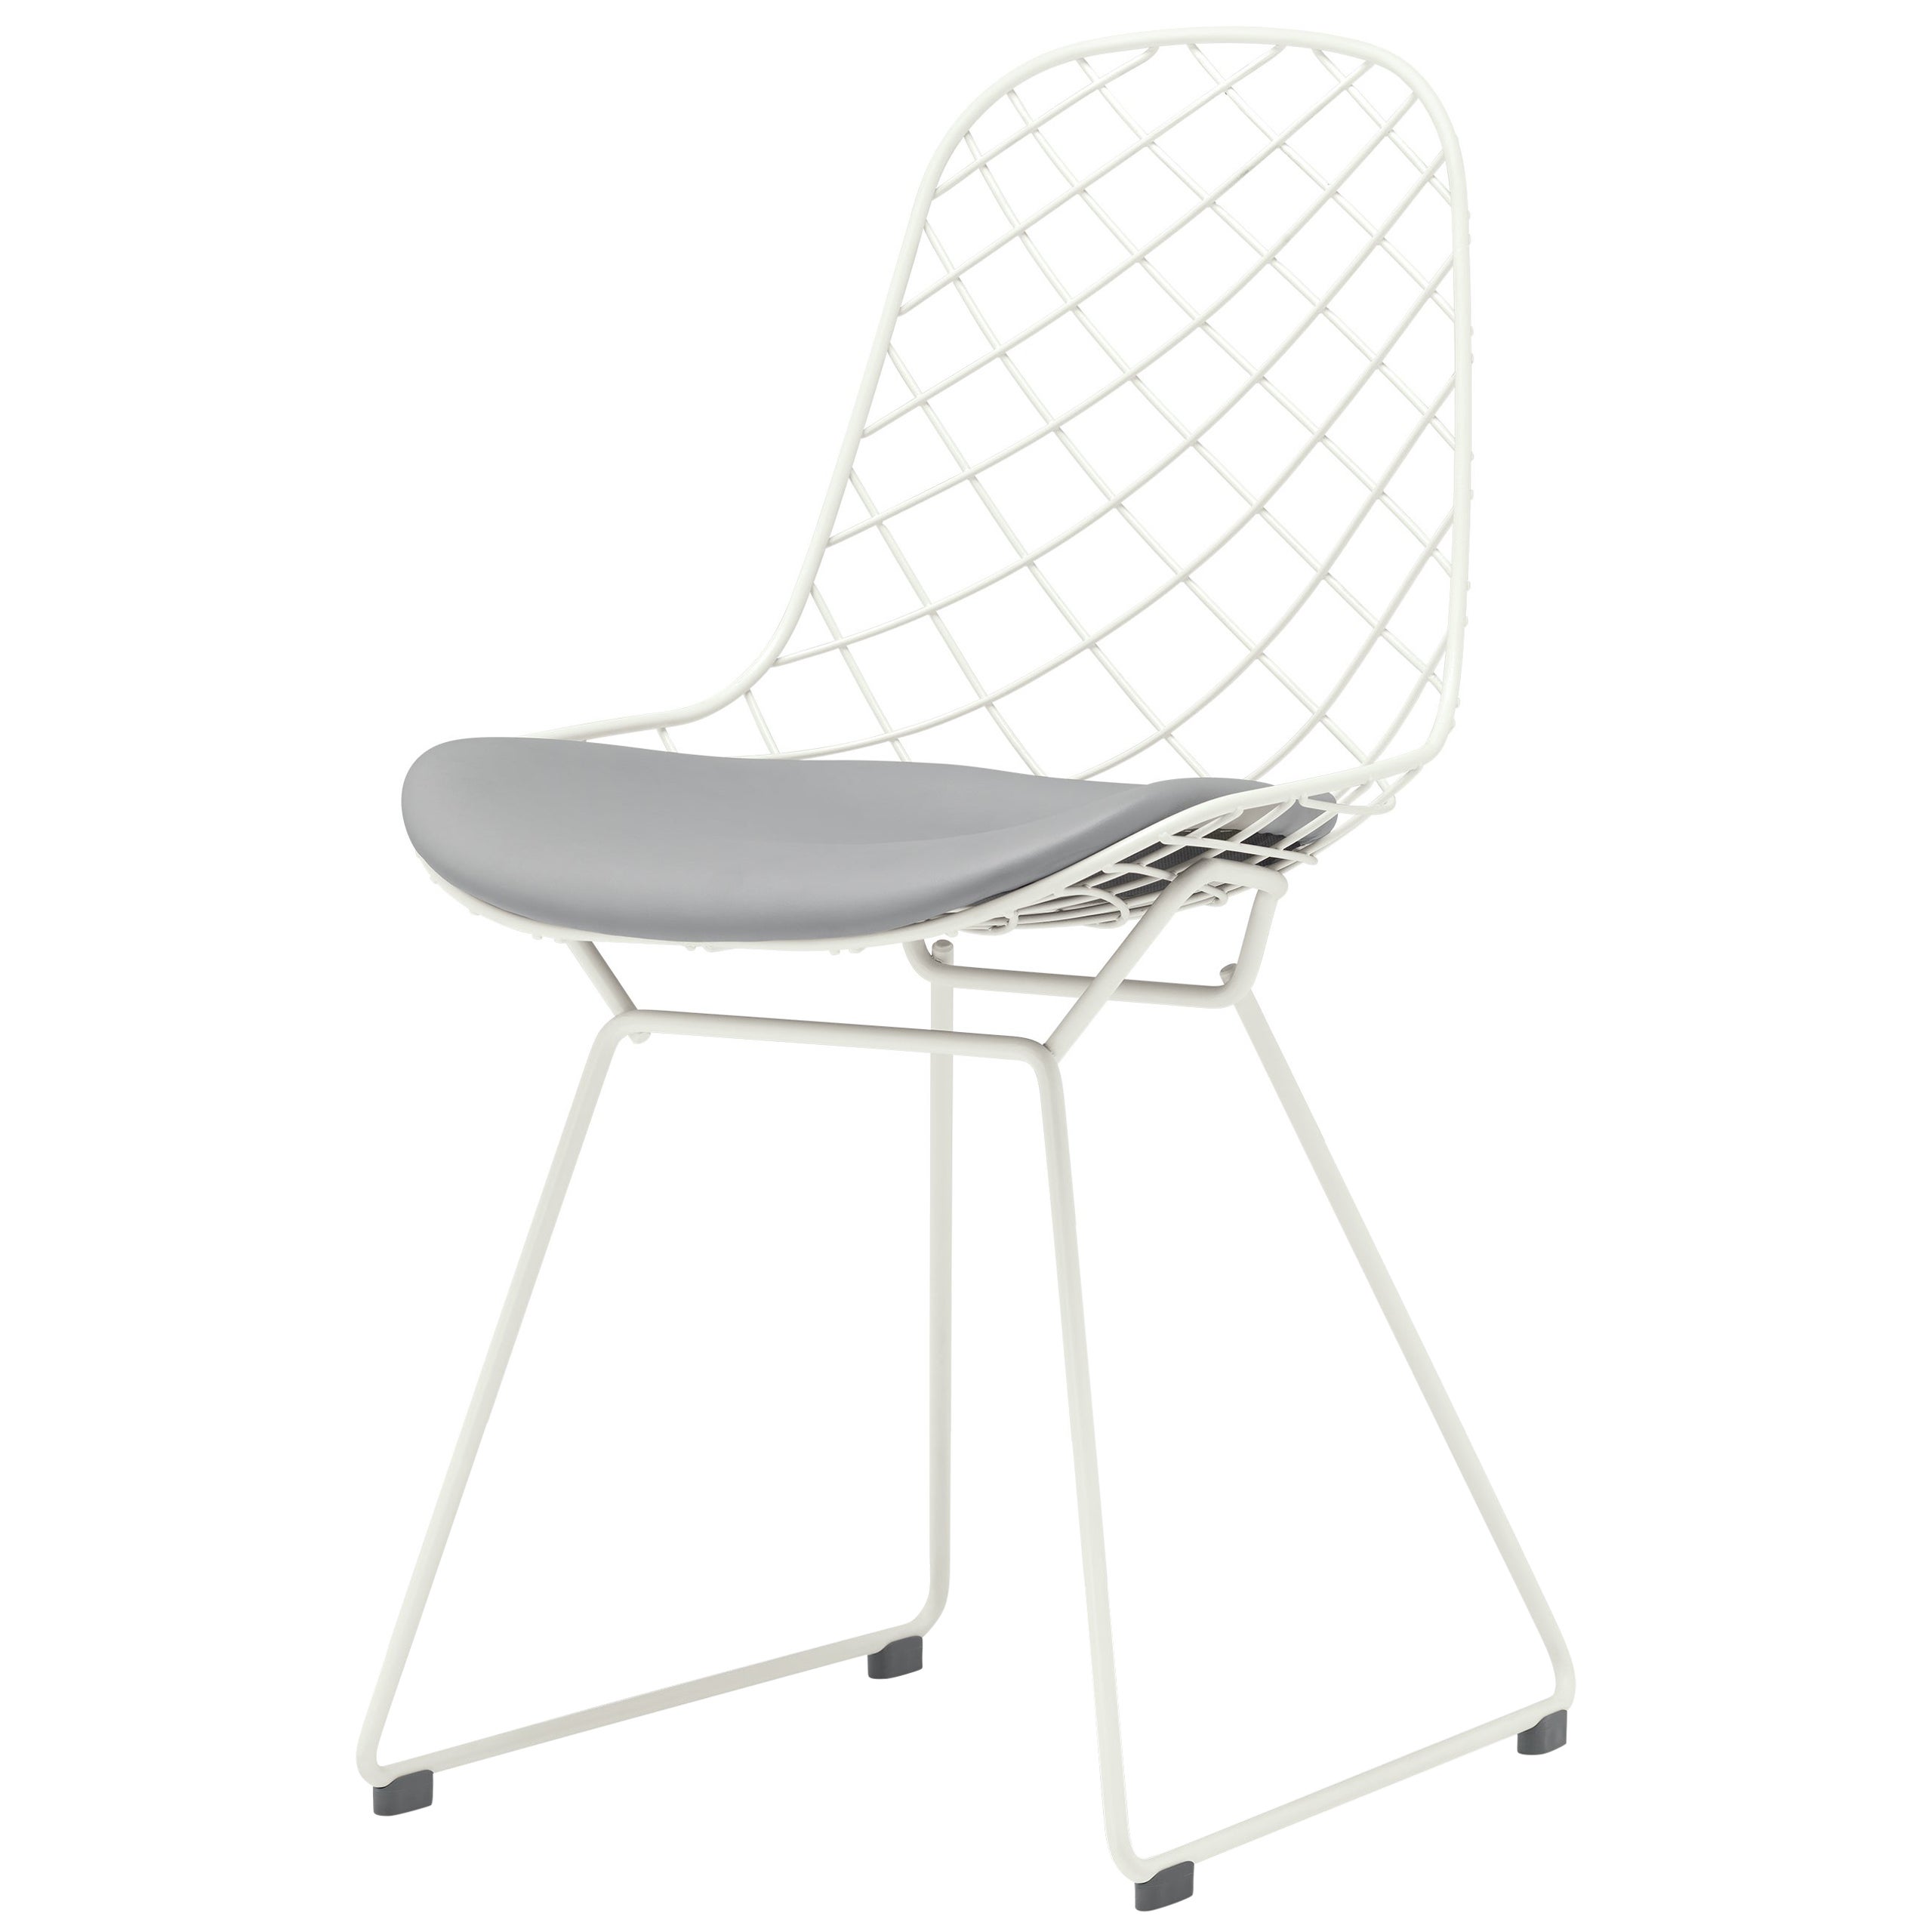 Alias N01 Kobi Sledge Outdoor Chair in Leather Seat with White Lacquered Frame For Sale